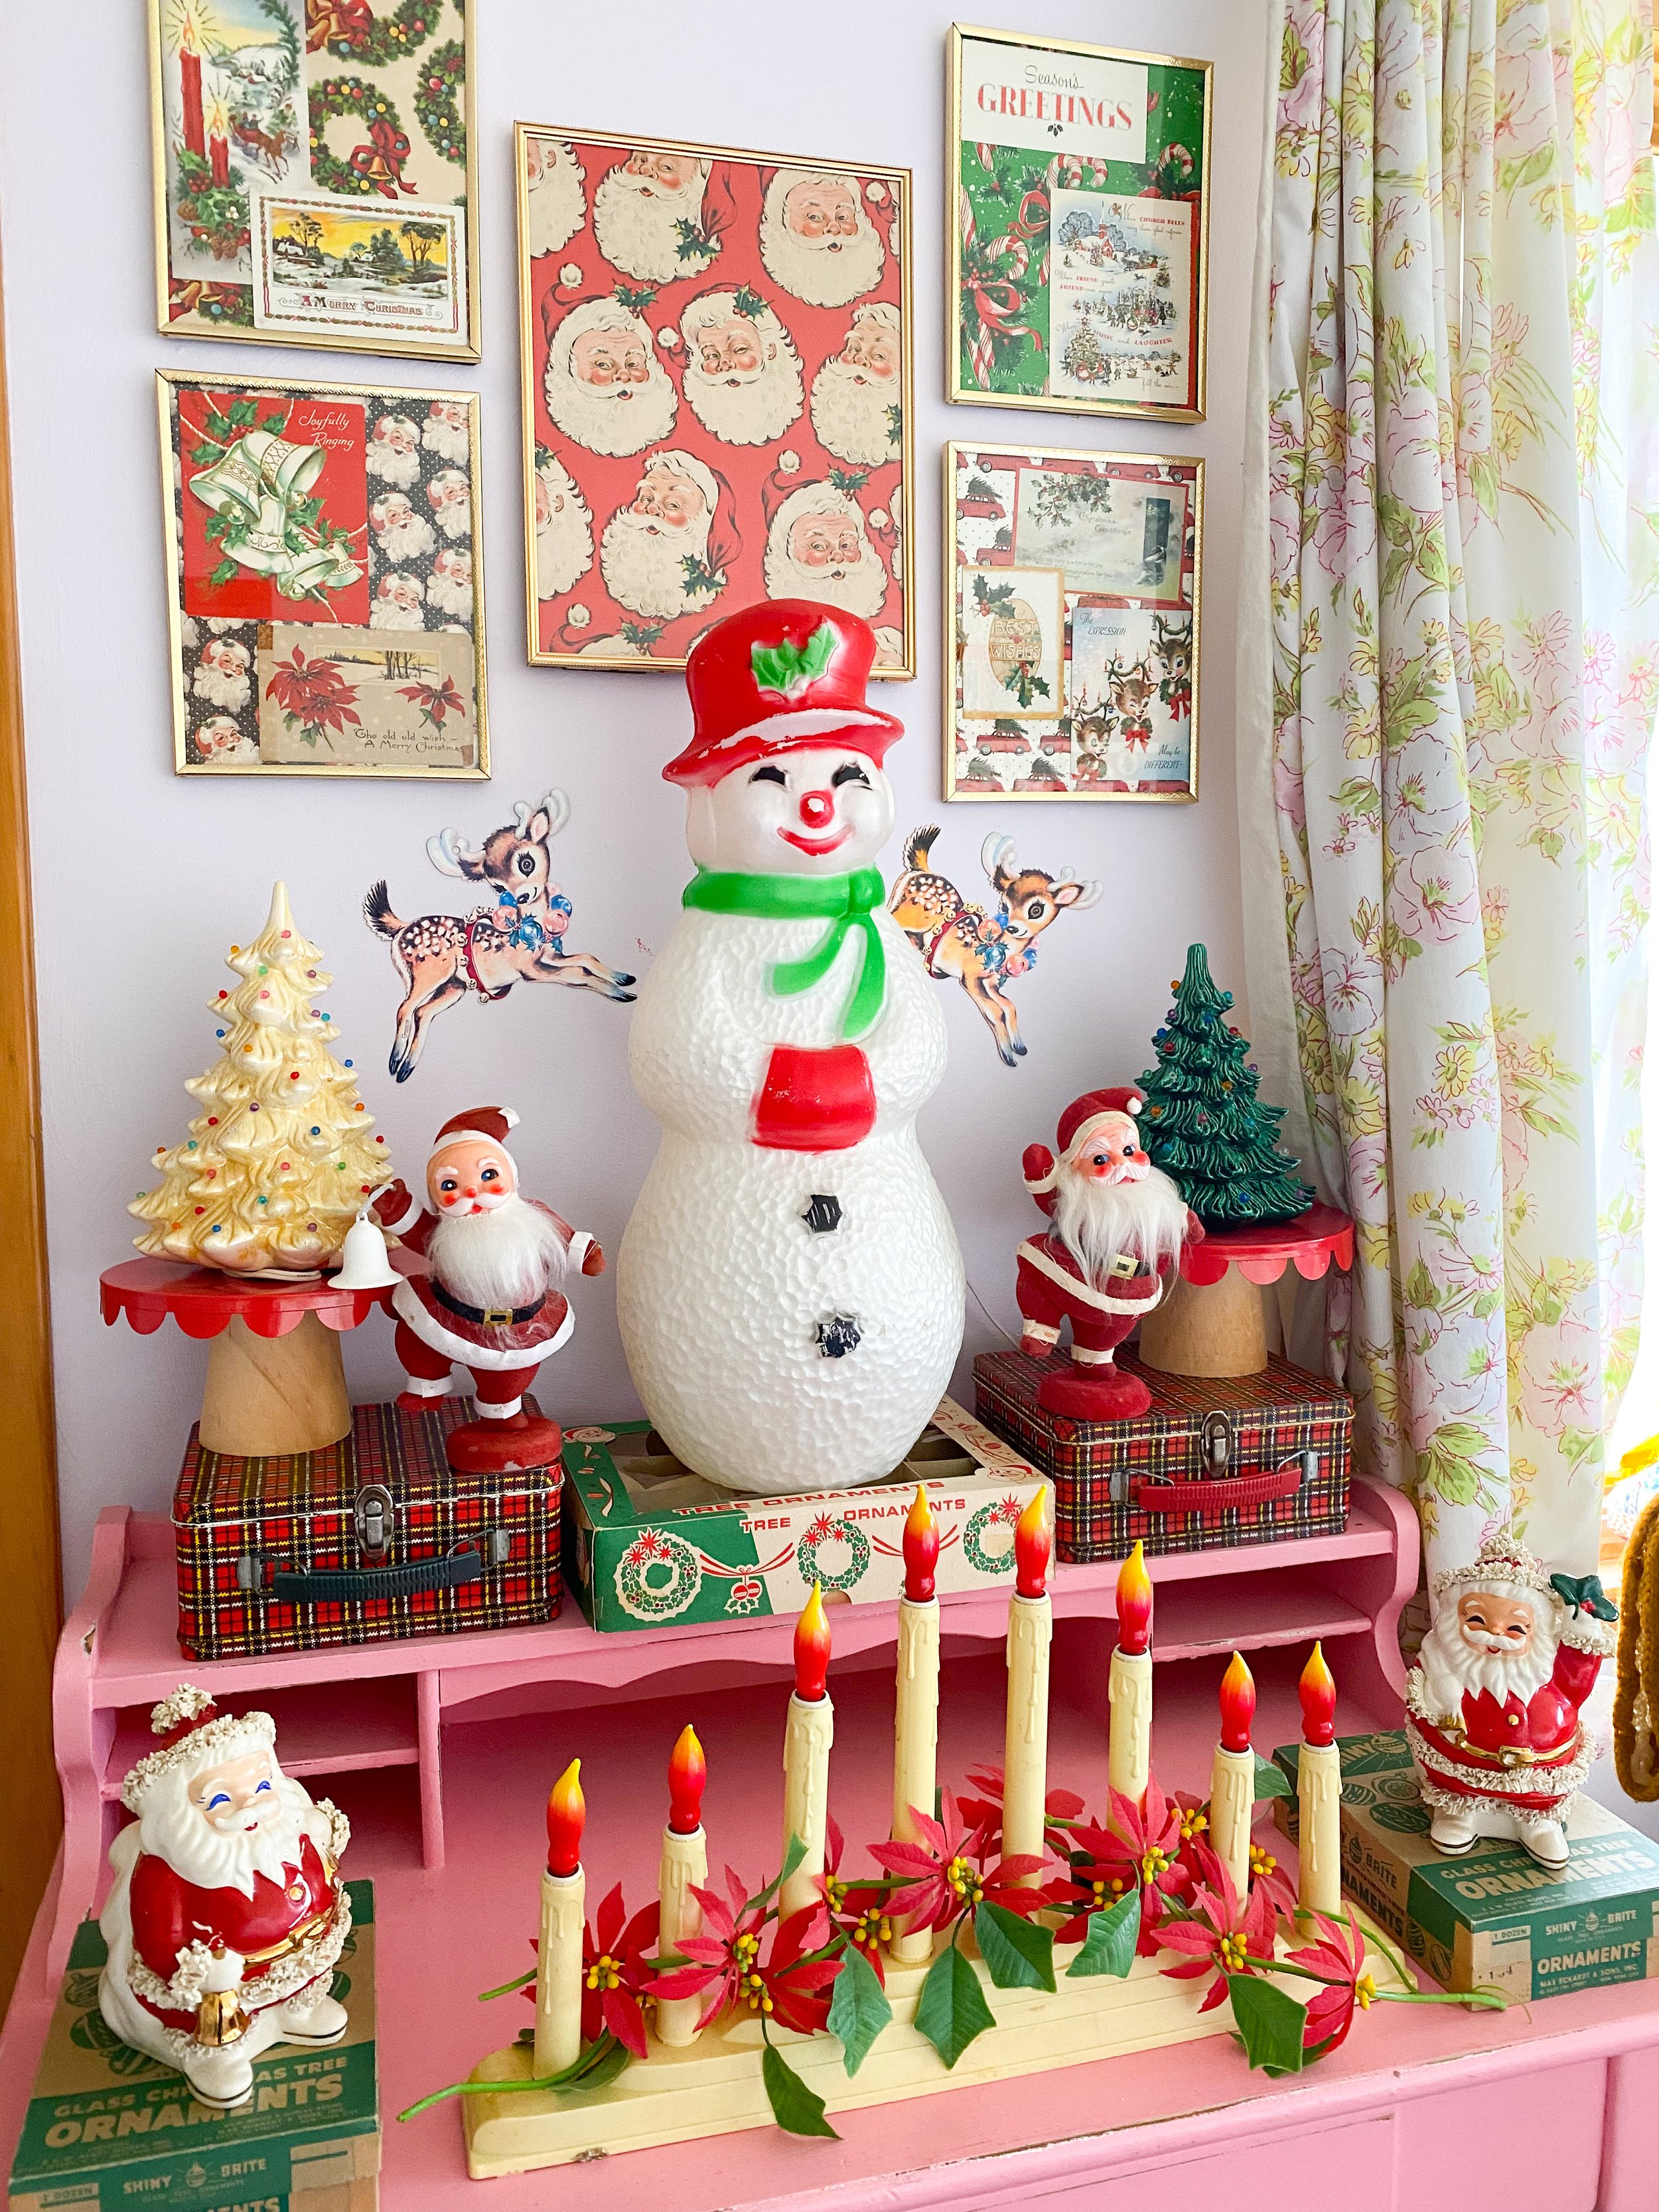 Buy Vintage Christmas Decorations for the Best Holiday Decor ...